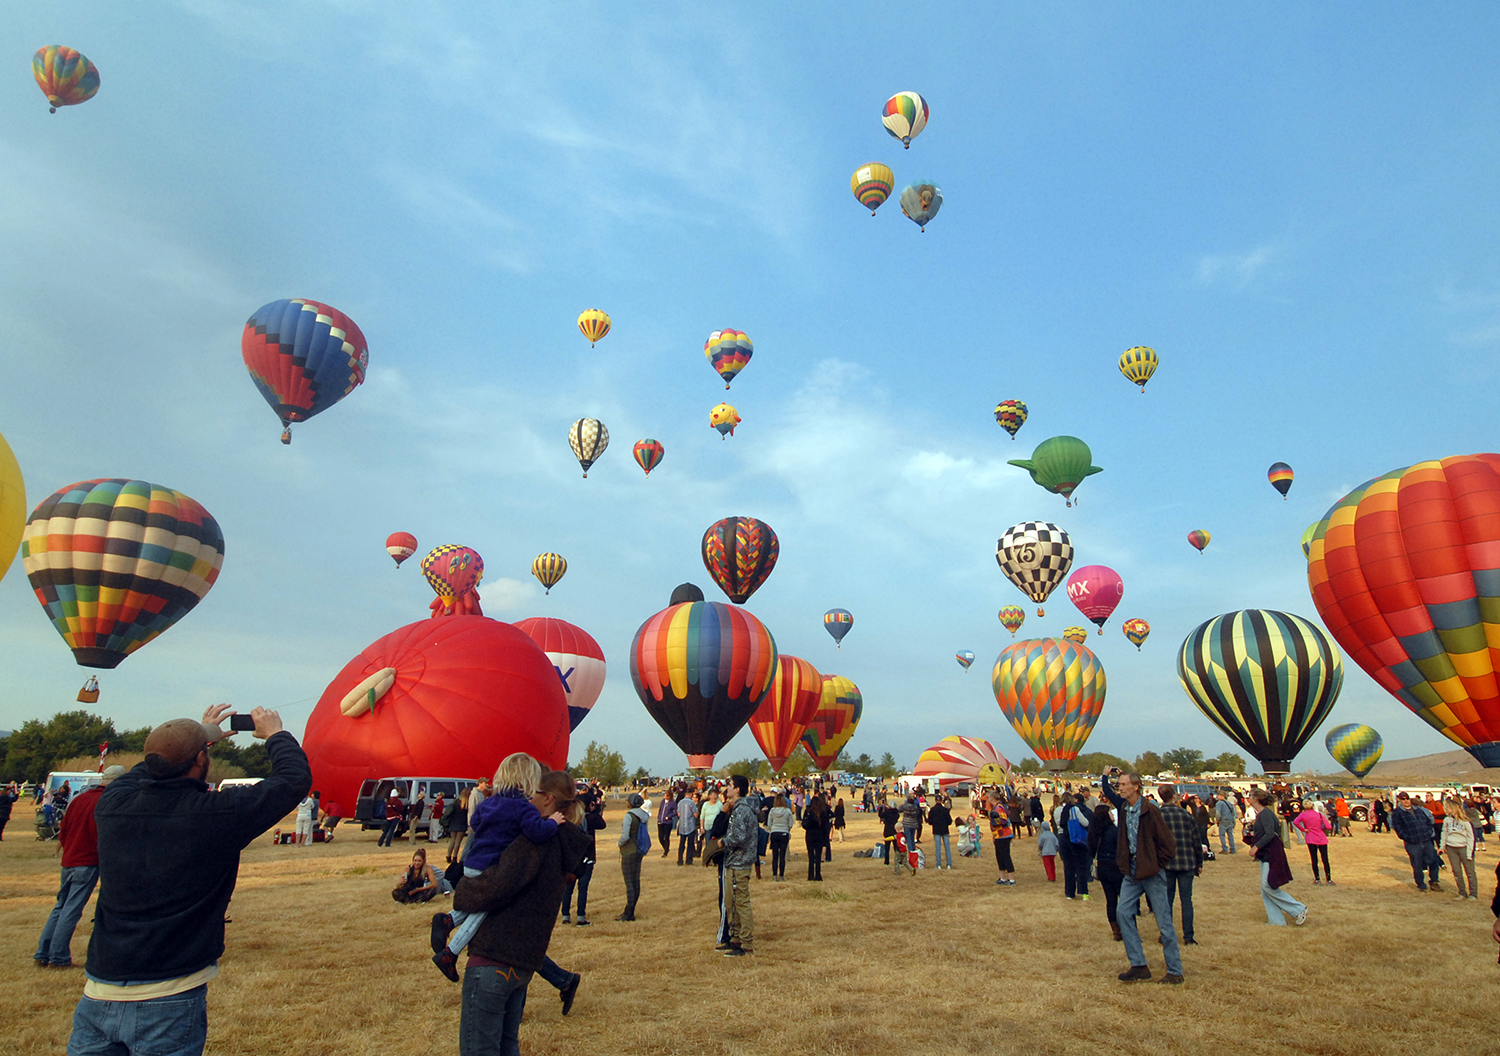 World Renowned HotAir Balloon Festival Returns to Reno, Nev. this